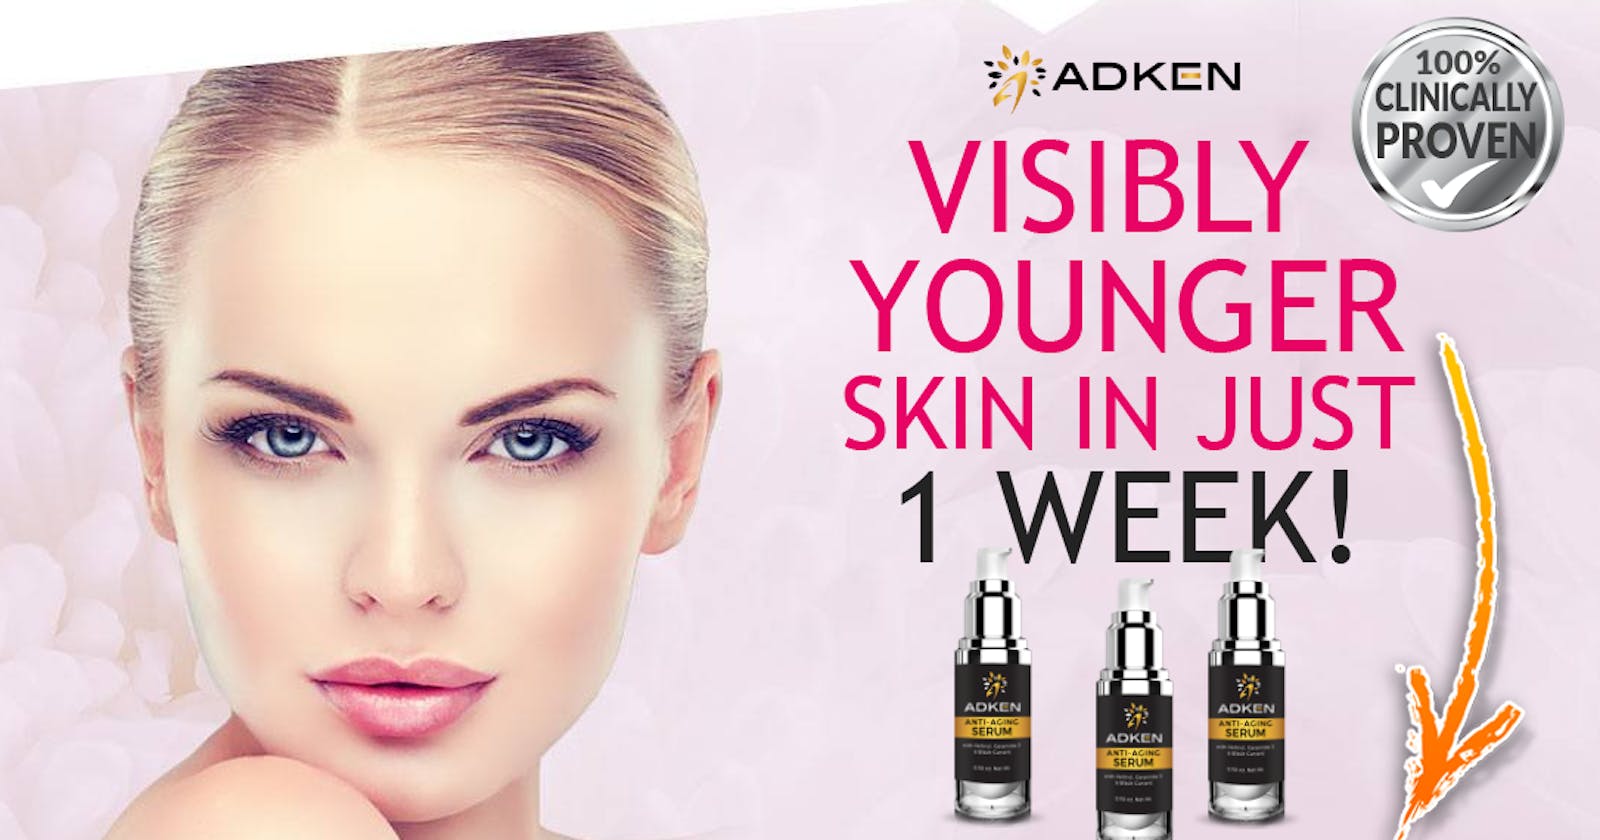 Discover the Benefits of Adken Anti-Aging Serum for Your Skin